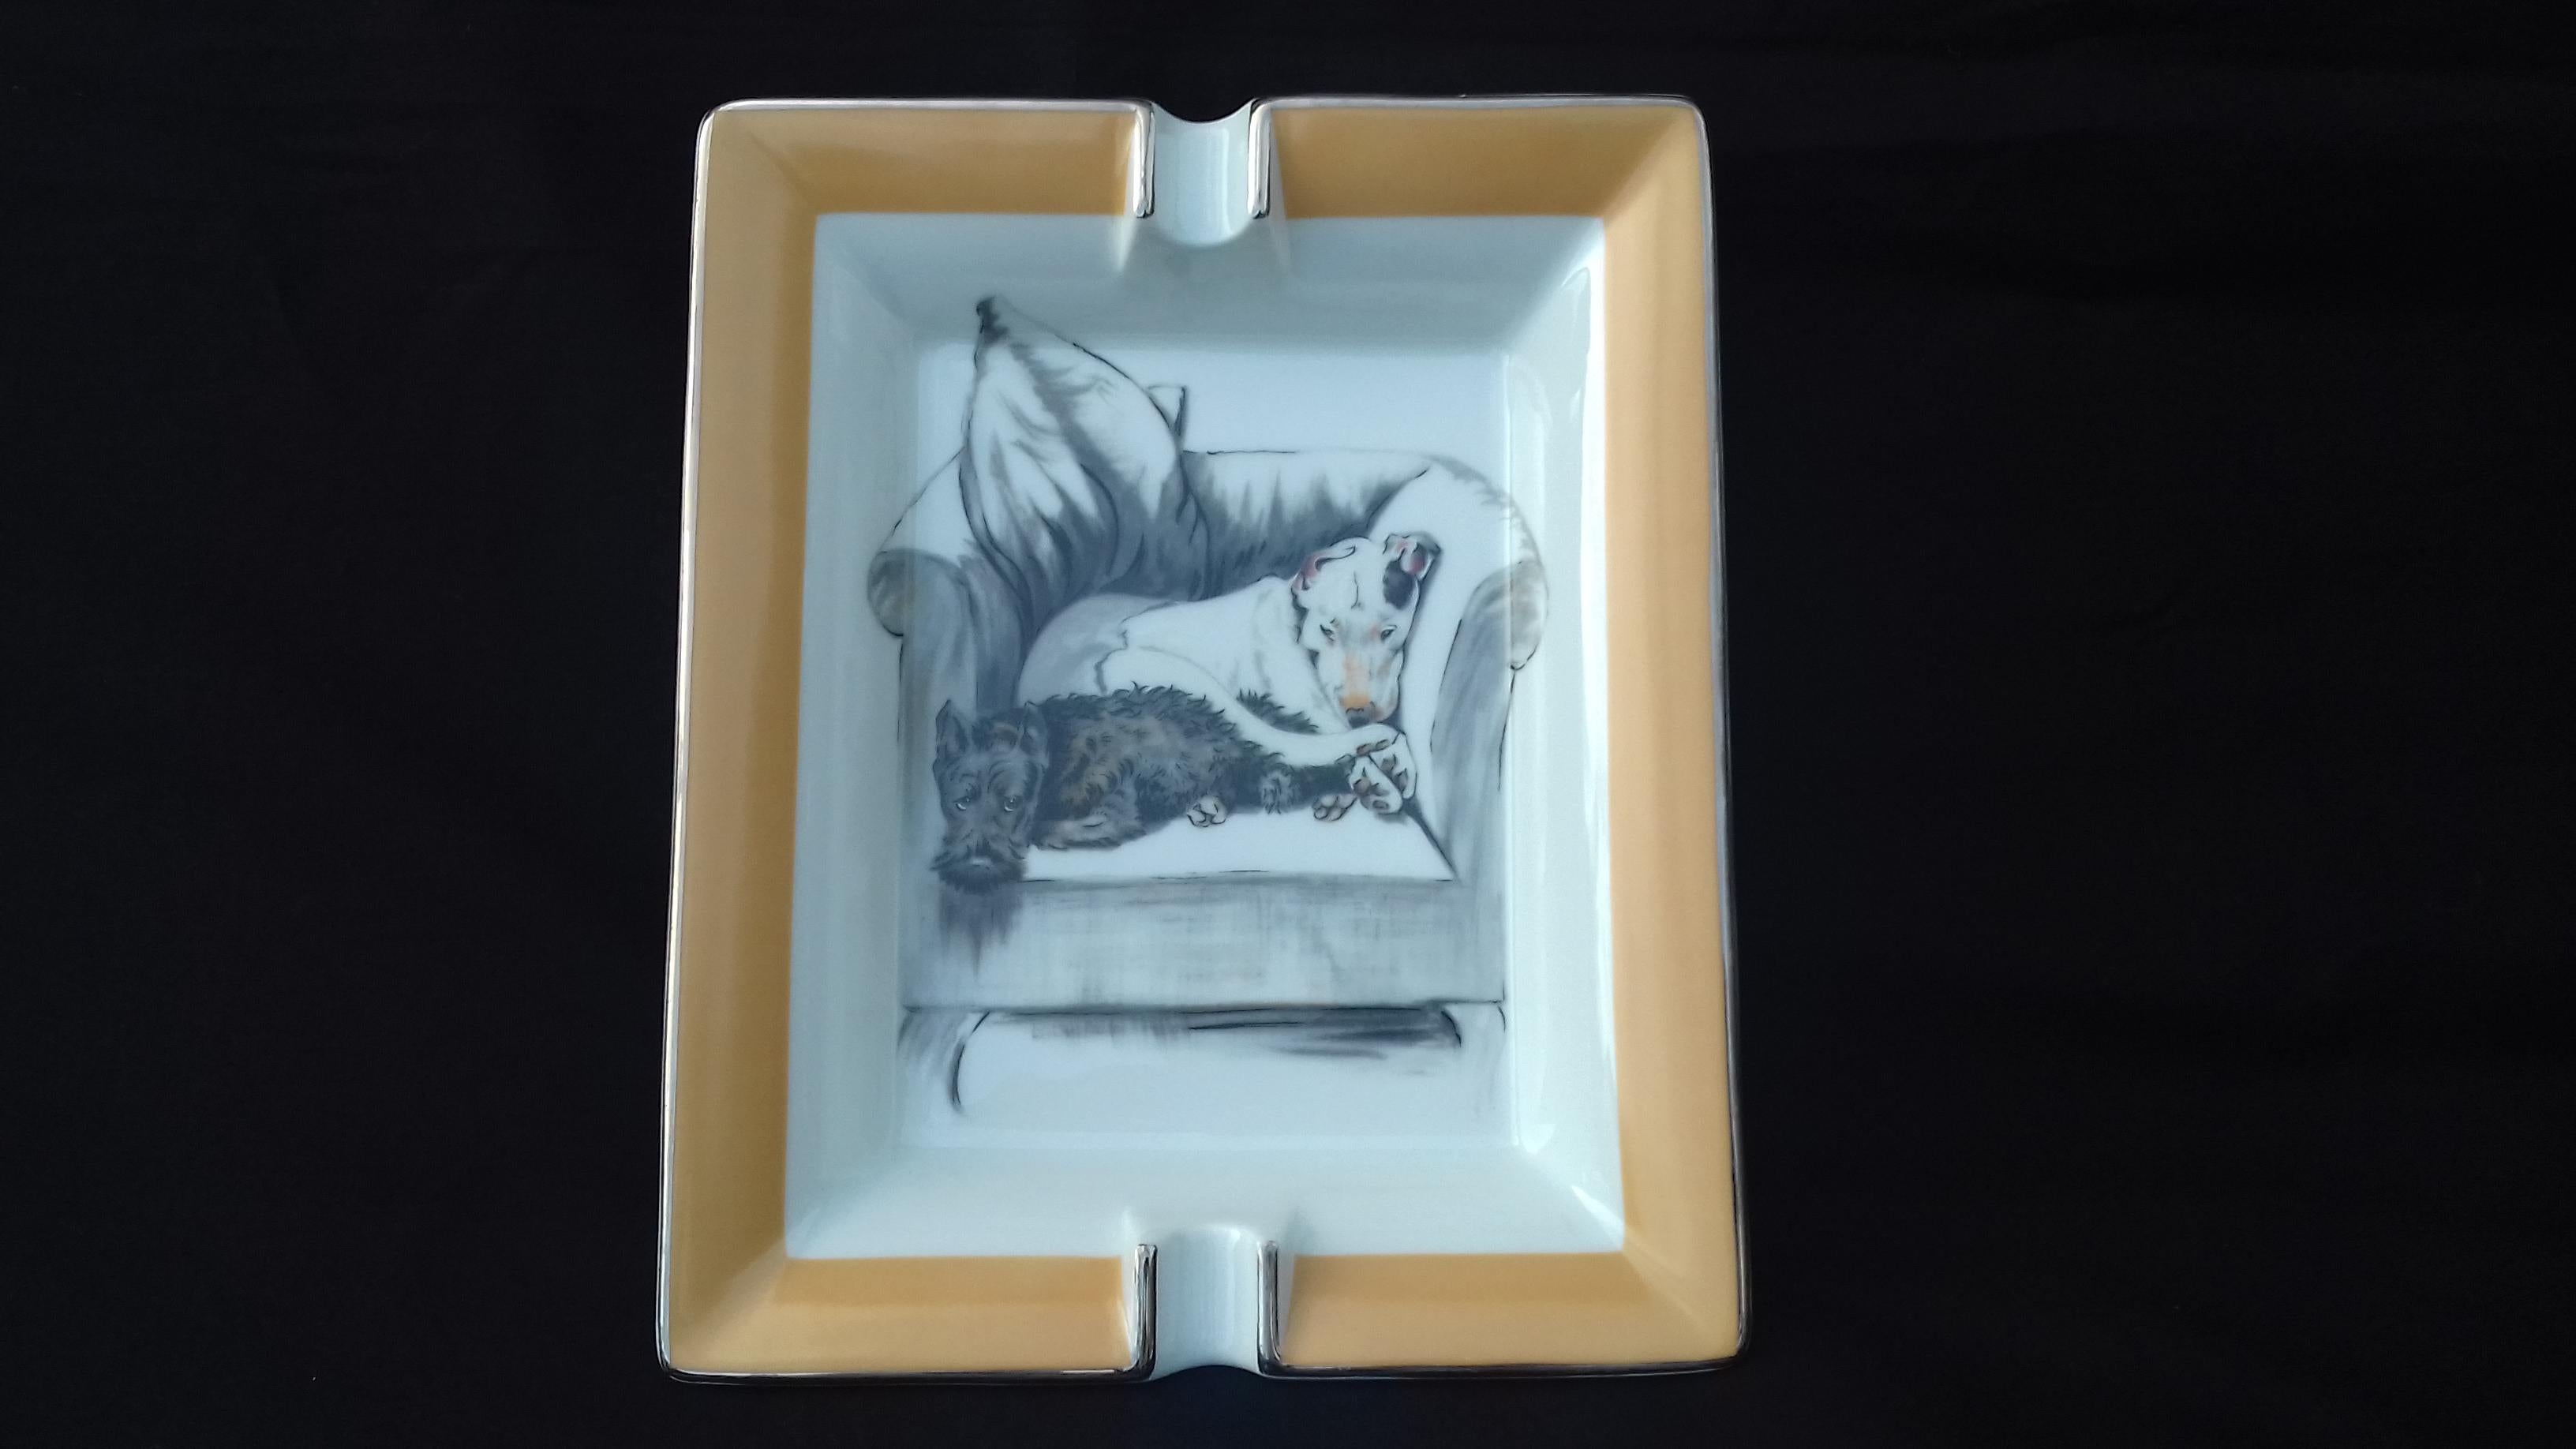 Rare Authentic Hermès Ashtray

Pattern: 2 dogs napping on an armchair

Made in France

Made of Printed Porcelain and Silver-Tone edges

Colorways: White Background, Beige Border, Black Grey and White drawings

